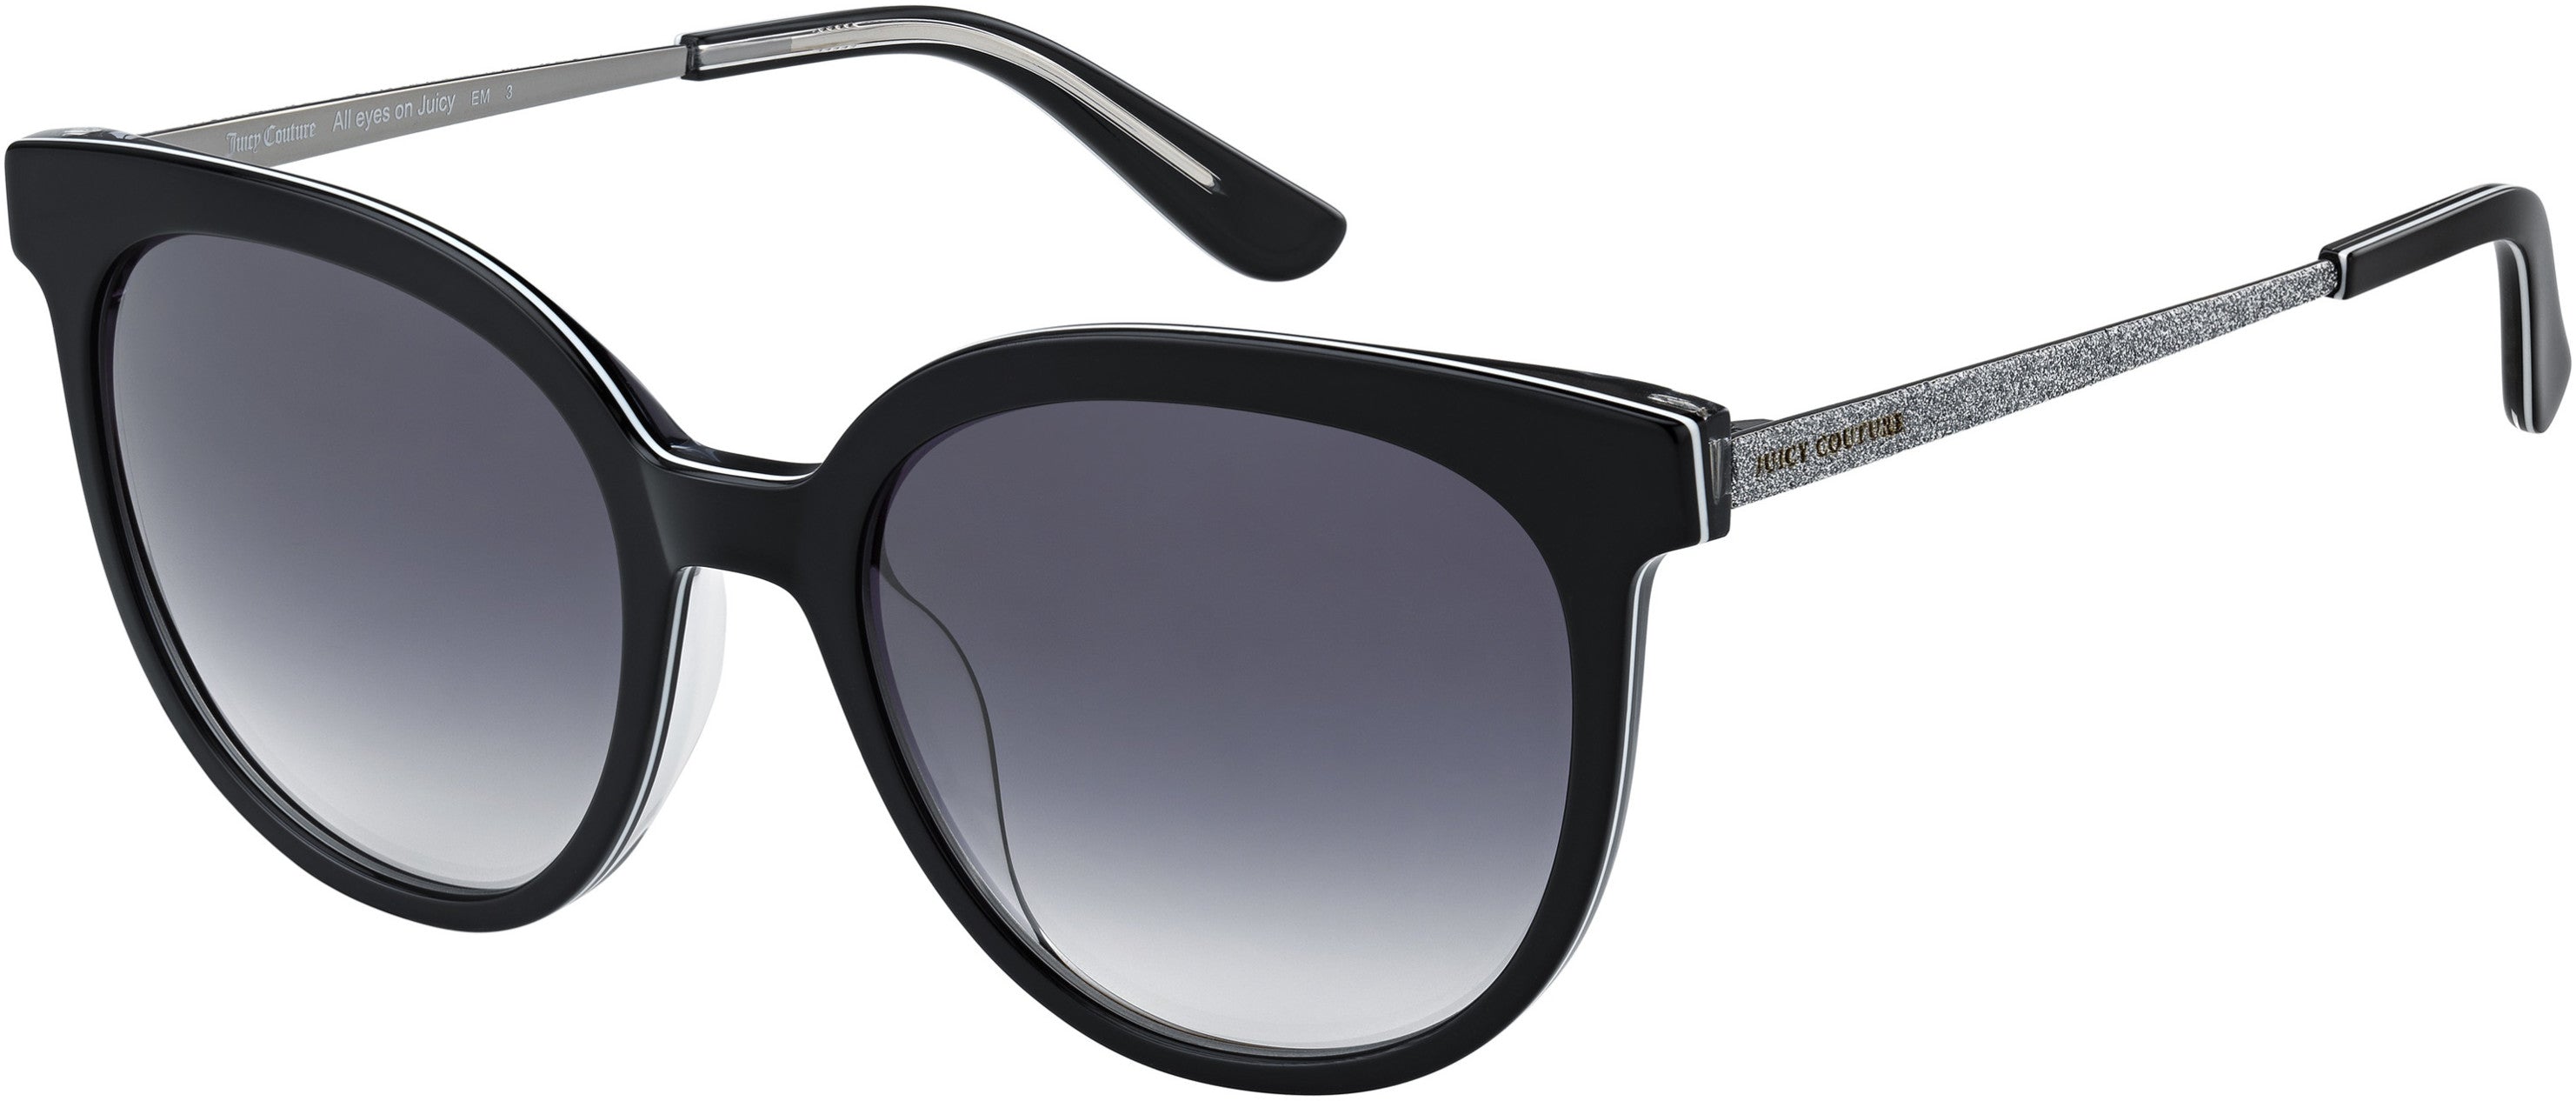 Juicy Couture Juicy 610/G/S Oval Modified Sunglasses 0807-0807  Black (9O Dark Gray Gradient)